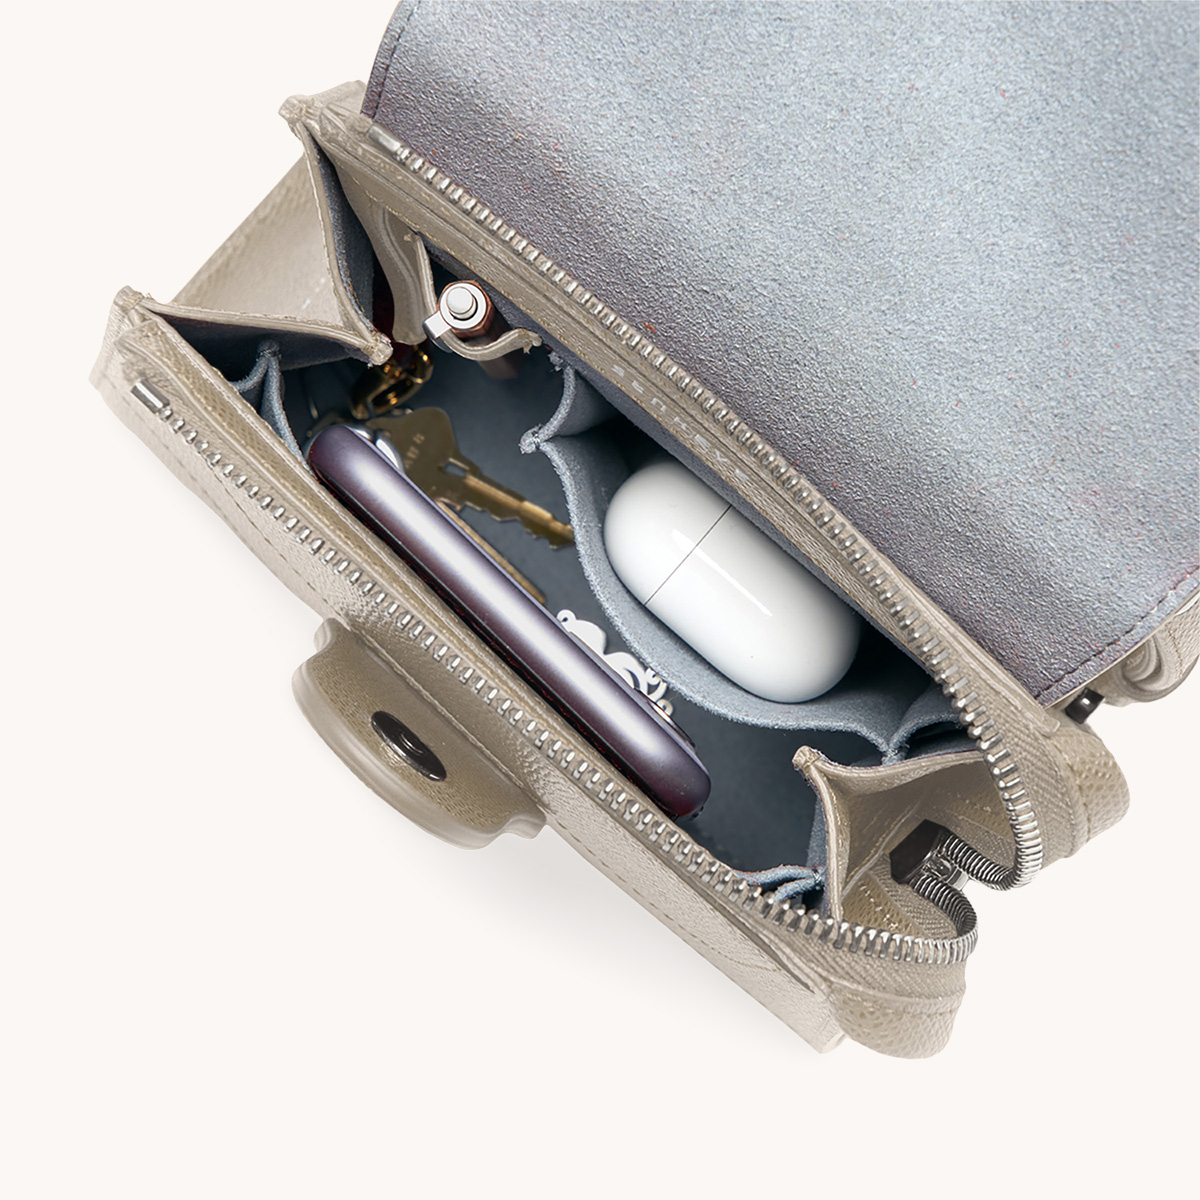 Mini Alunna Bag Pebbled Sand with Silver Hardware Interior View with What Fits: phone, AirPods, keys